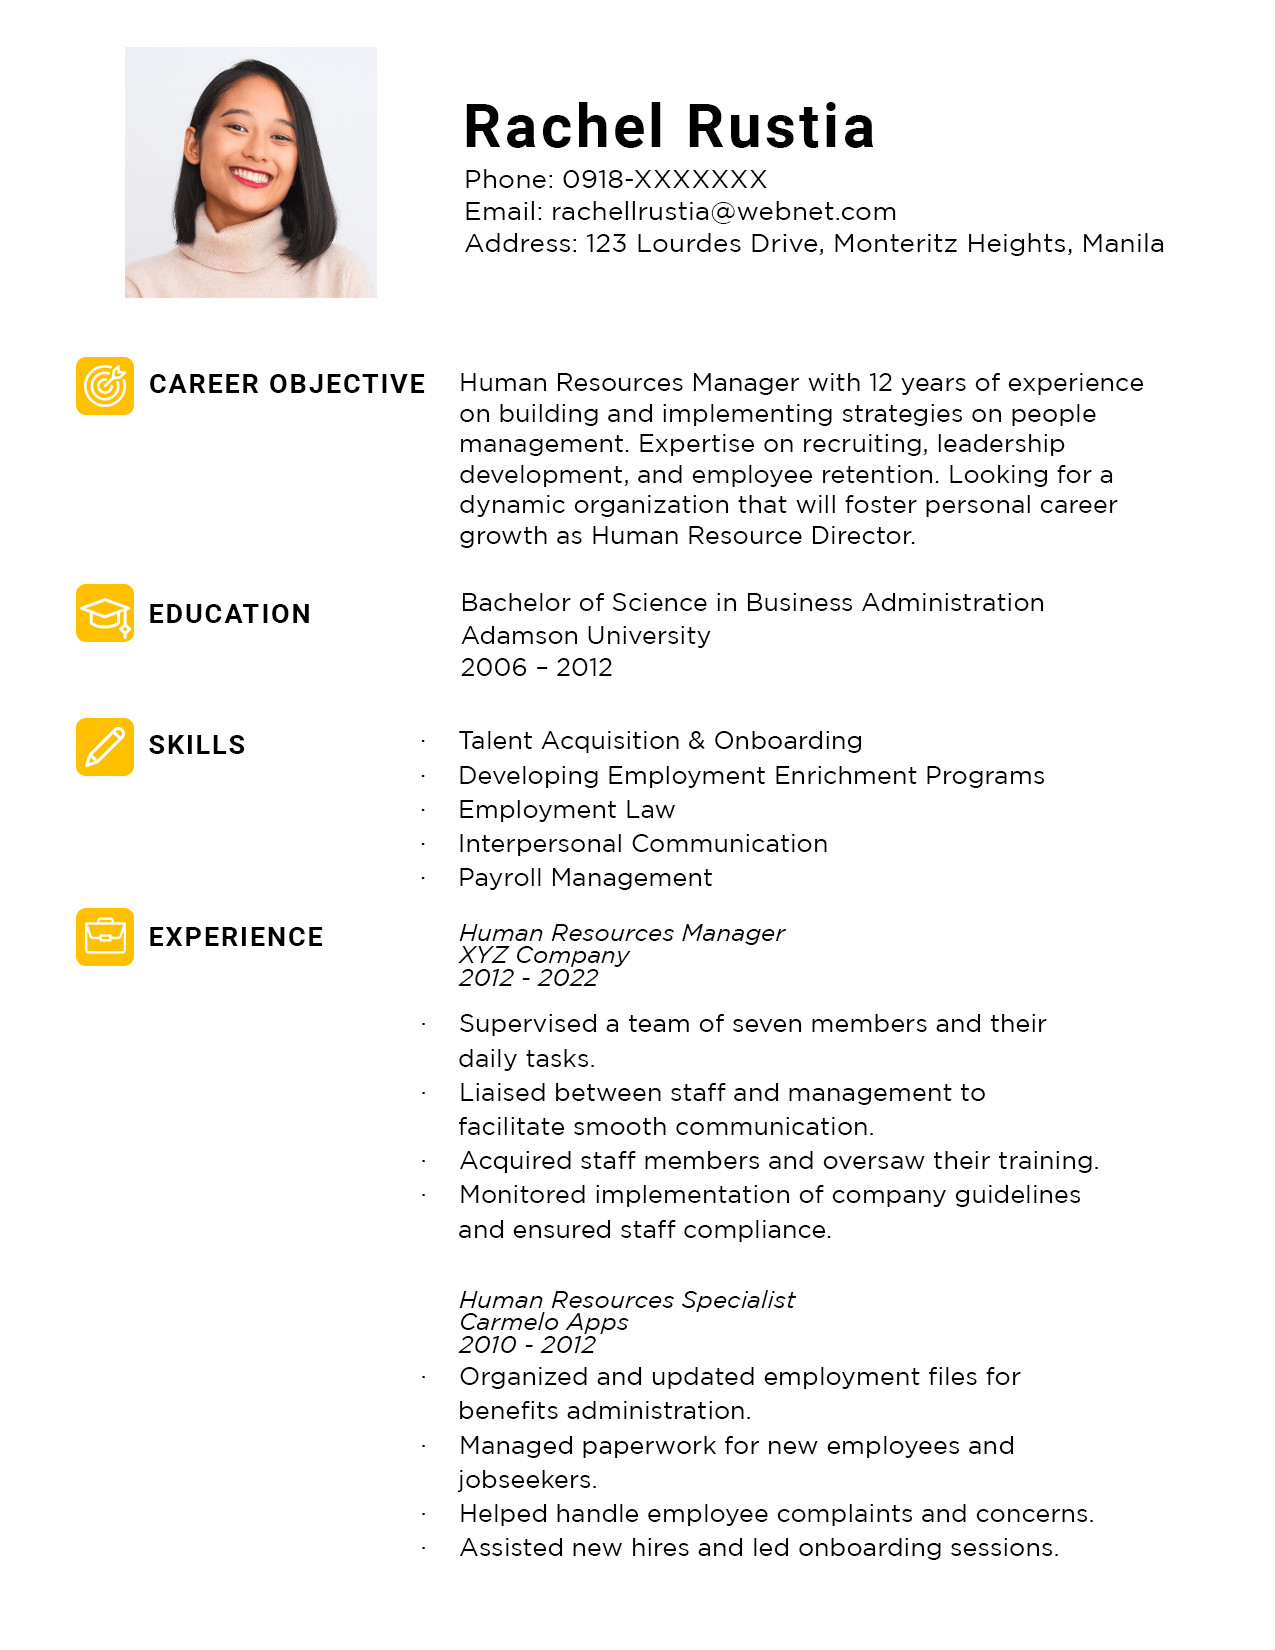 Employee Of the Year Resume Sample Resume Templates You Can Download for Free!